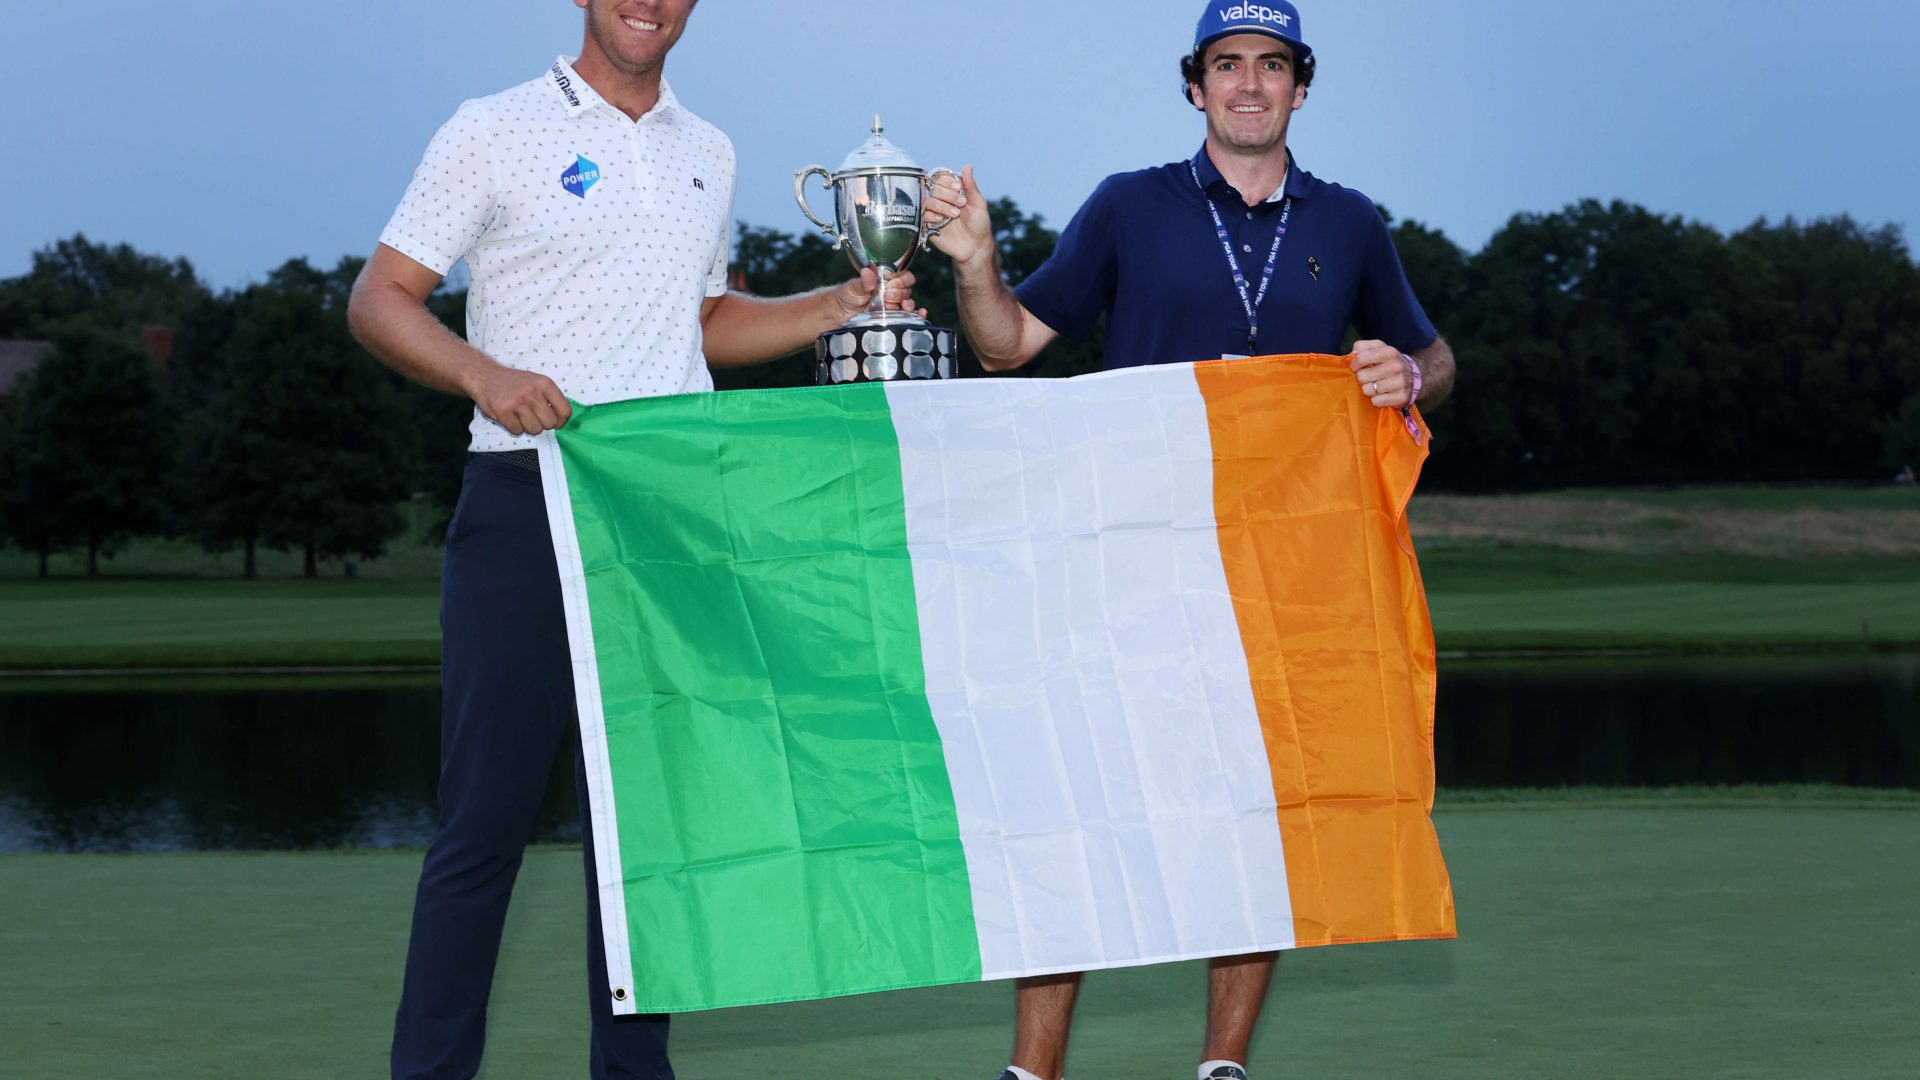 NICHOLASVILLE, KENTUCKY - JULY 18: Seamus Power of Ireland poses with the trophy and his caddie Aaron Flener after putting in to win on the 18th hole during the sixth playoff hole during the final round of the Barbasol Championship at Keene Trace Golf Club on July 18, 2021 in Nicholasville, Kentucky. (Photo by Andy Lyons/Getty Images)